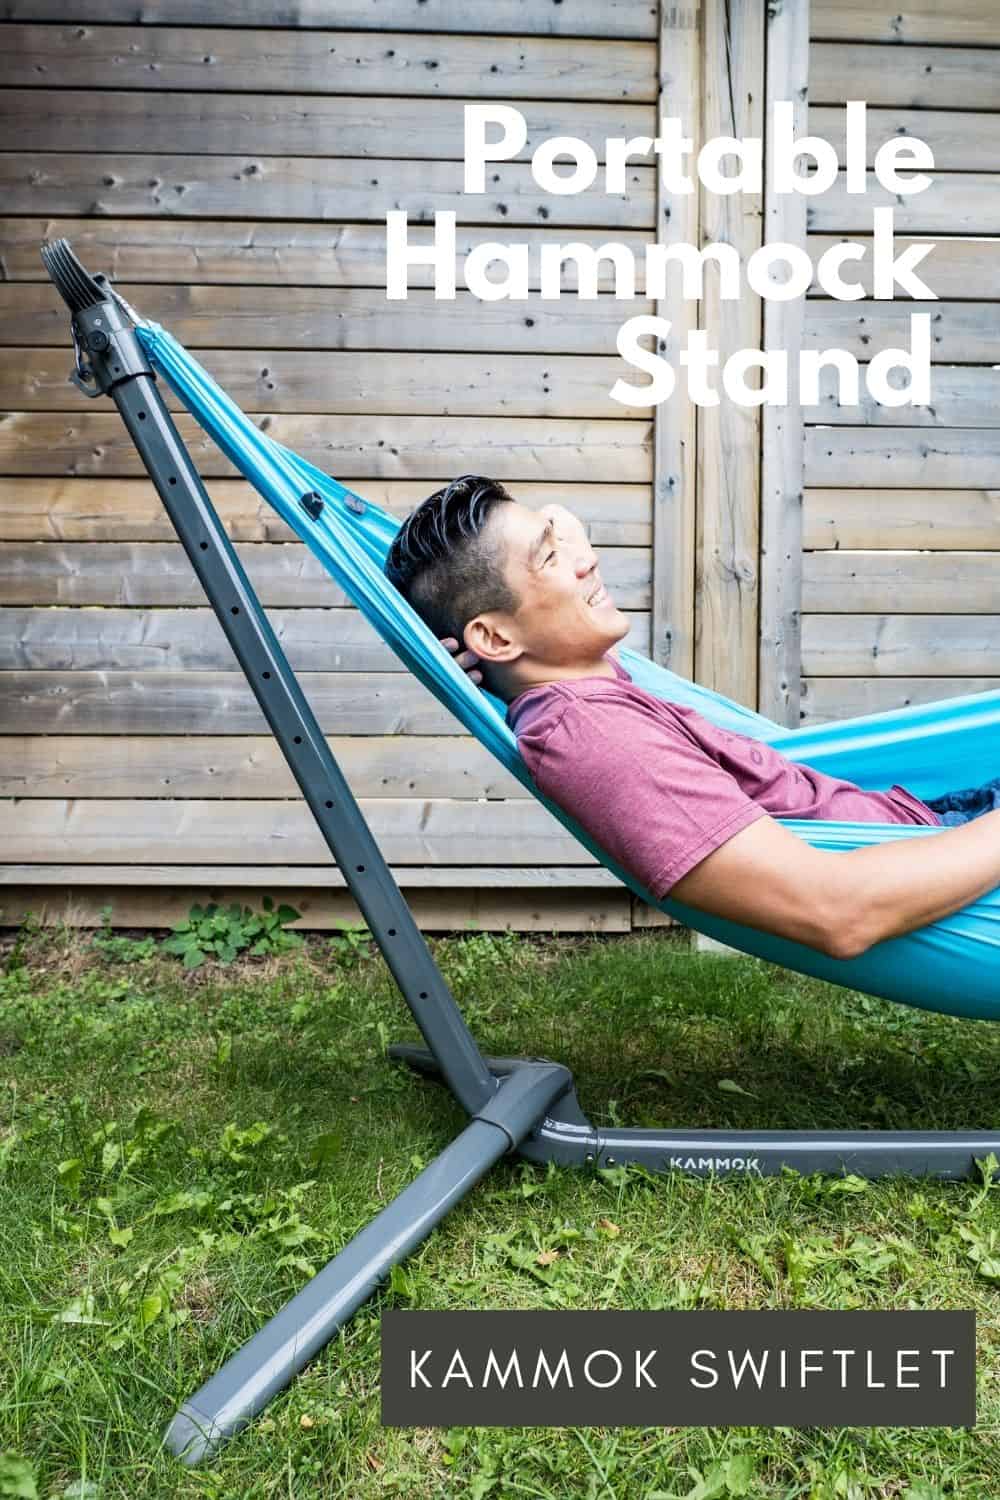 Best Portable Hammock Stand - Kammok Swiftlet Review